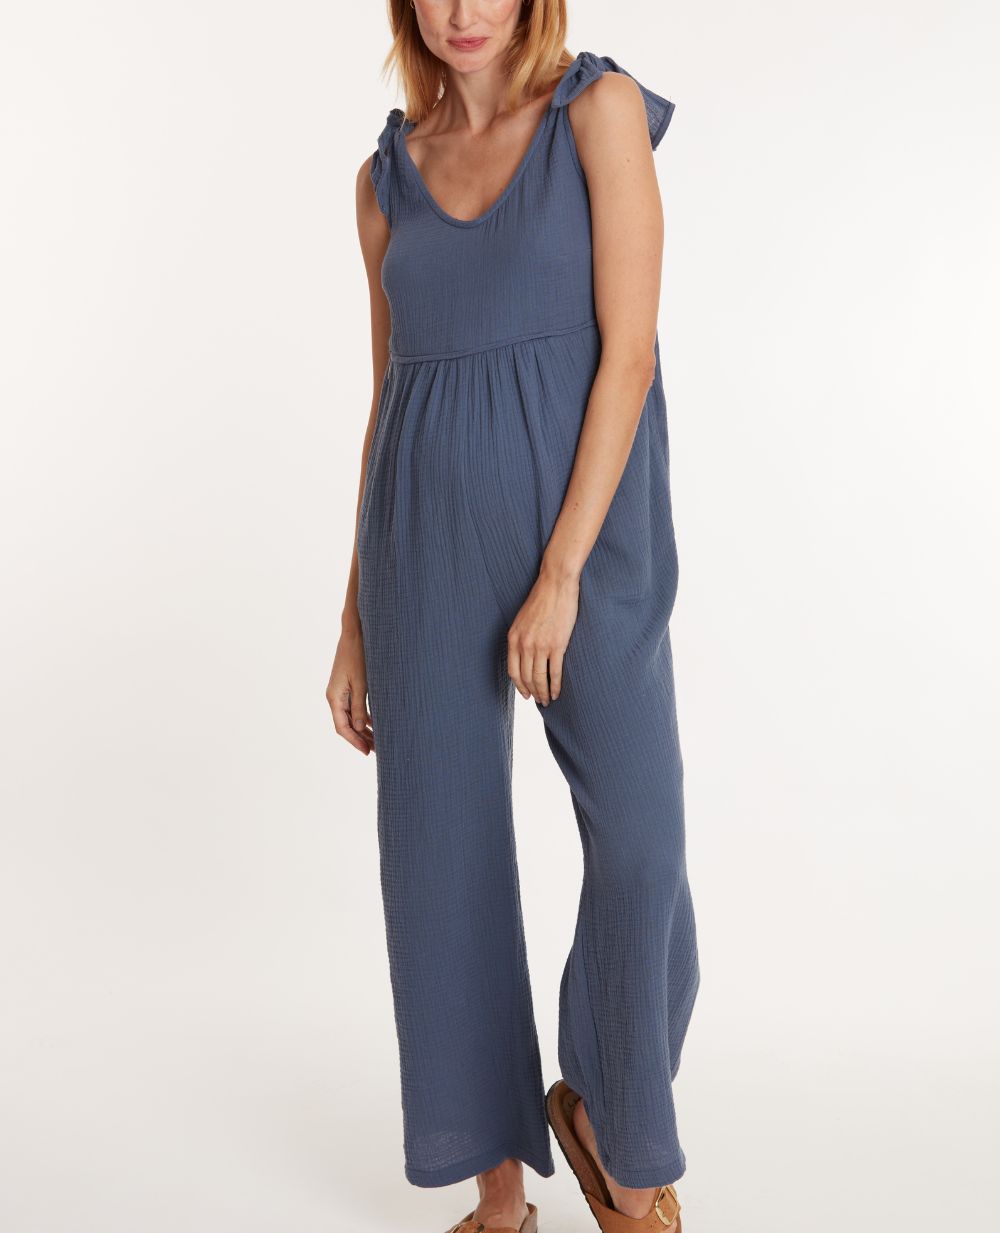 Pregnancy and nursing suit Canyon midnight blue